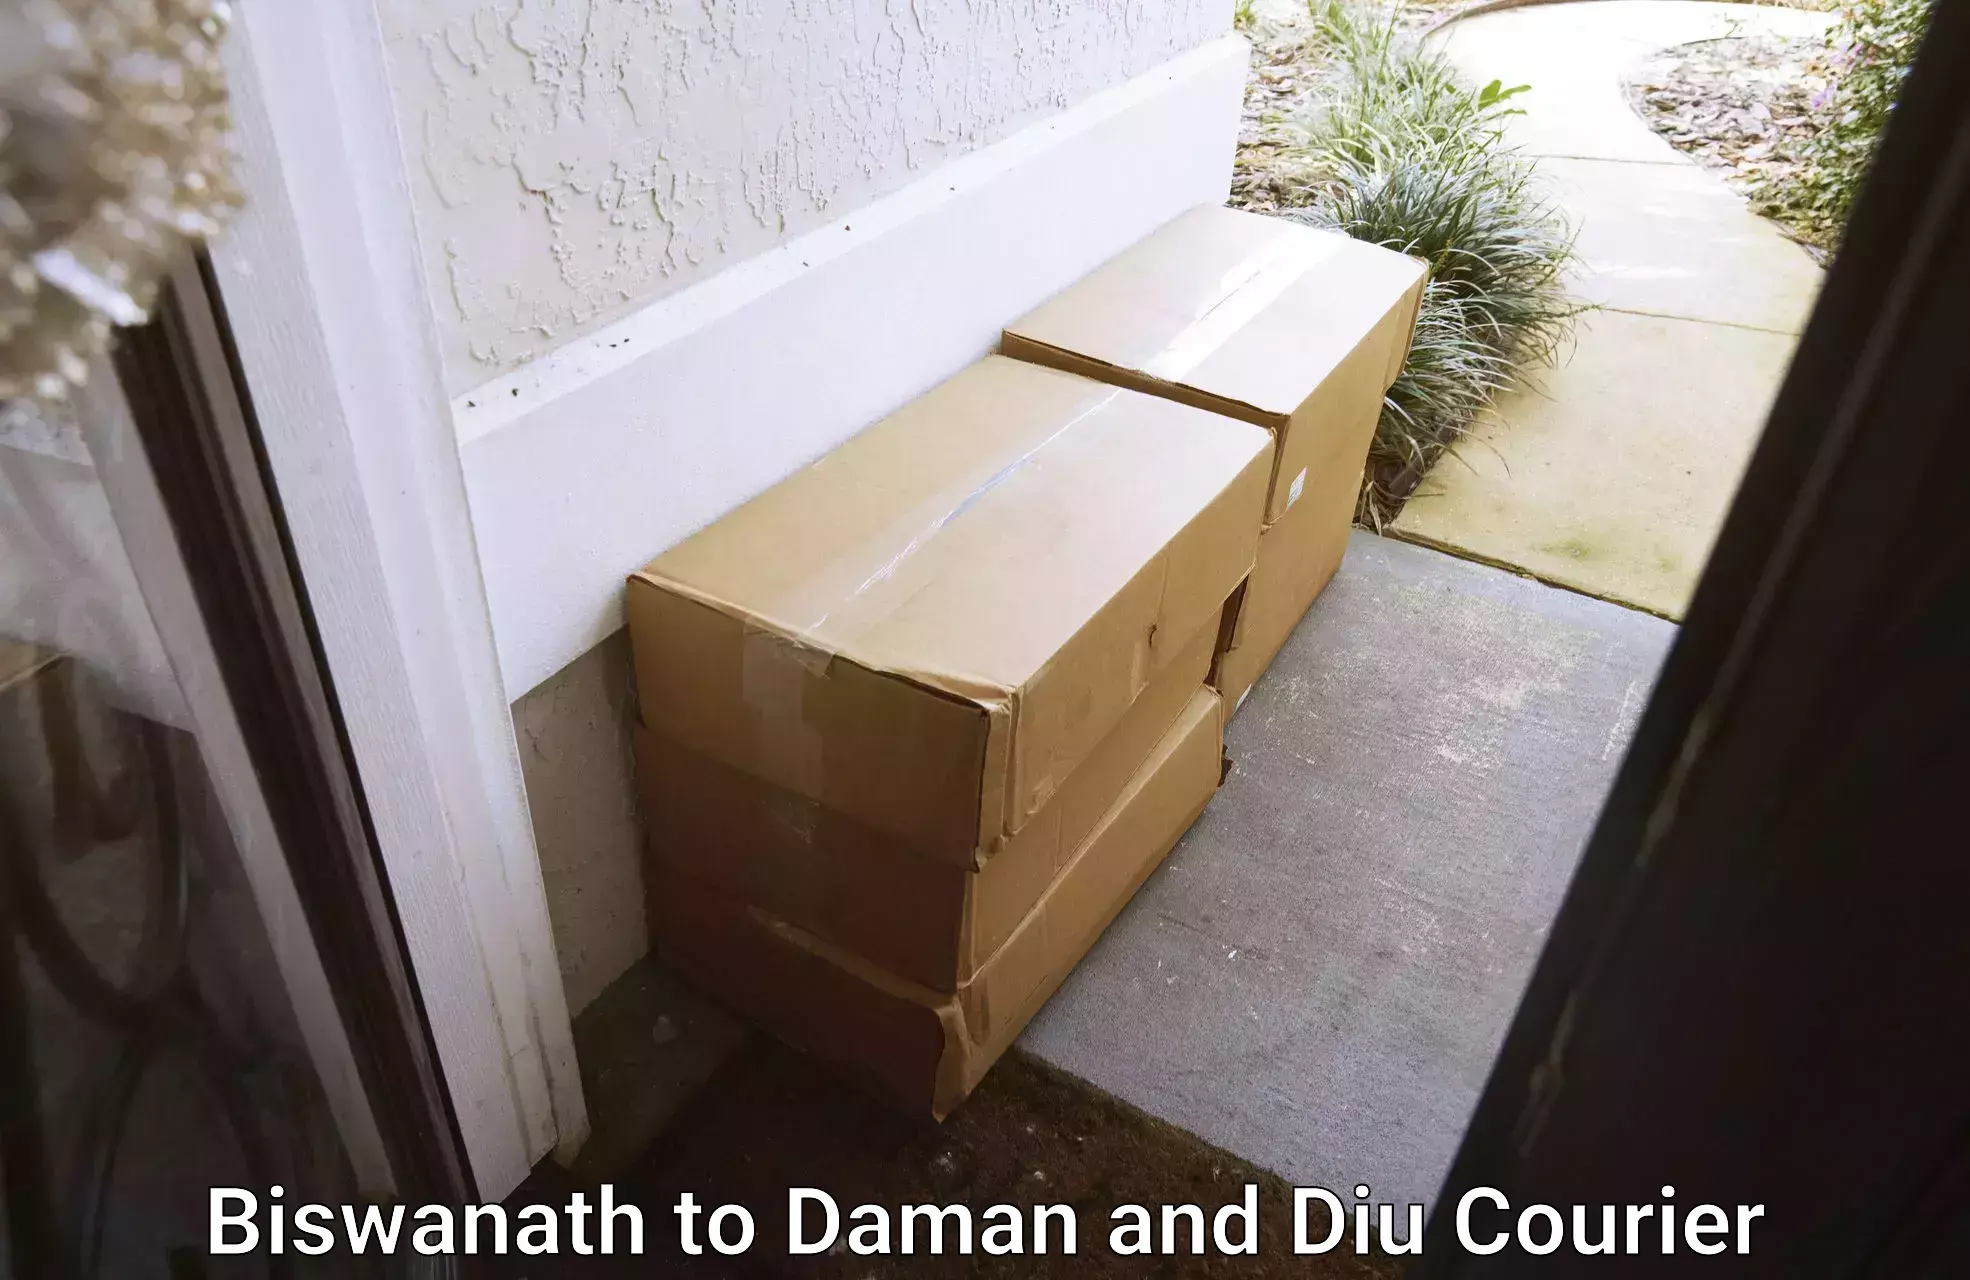 Reliable shipping partners Biswanath to Daman and Diu